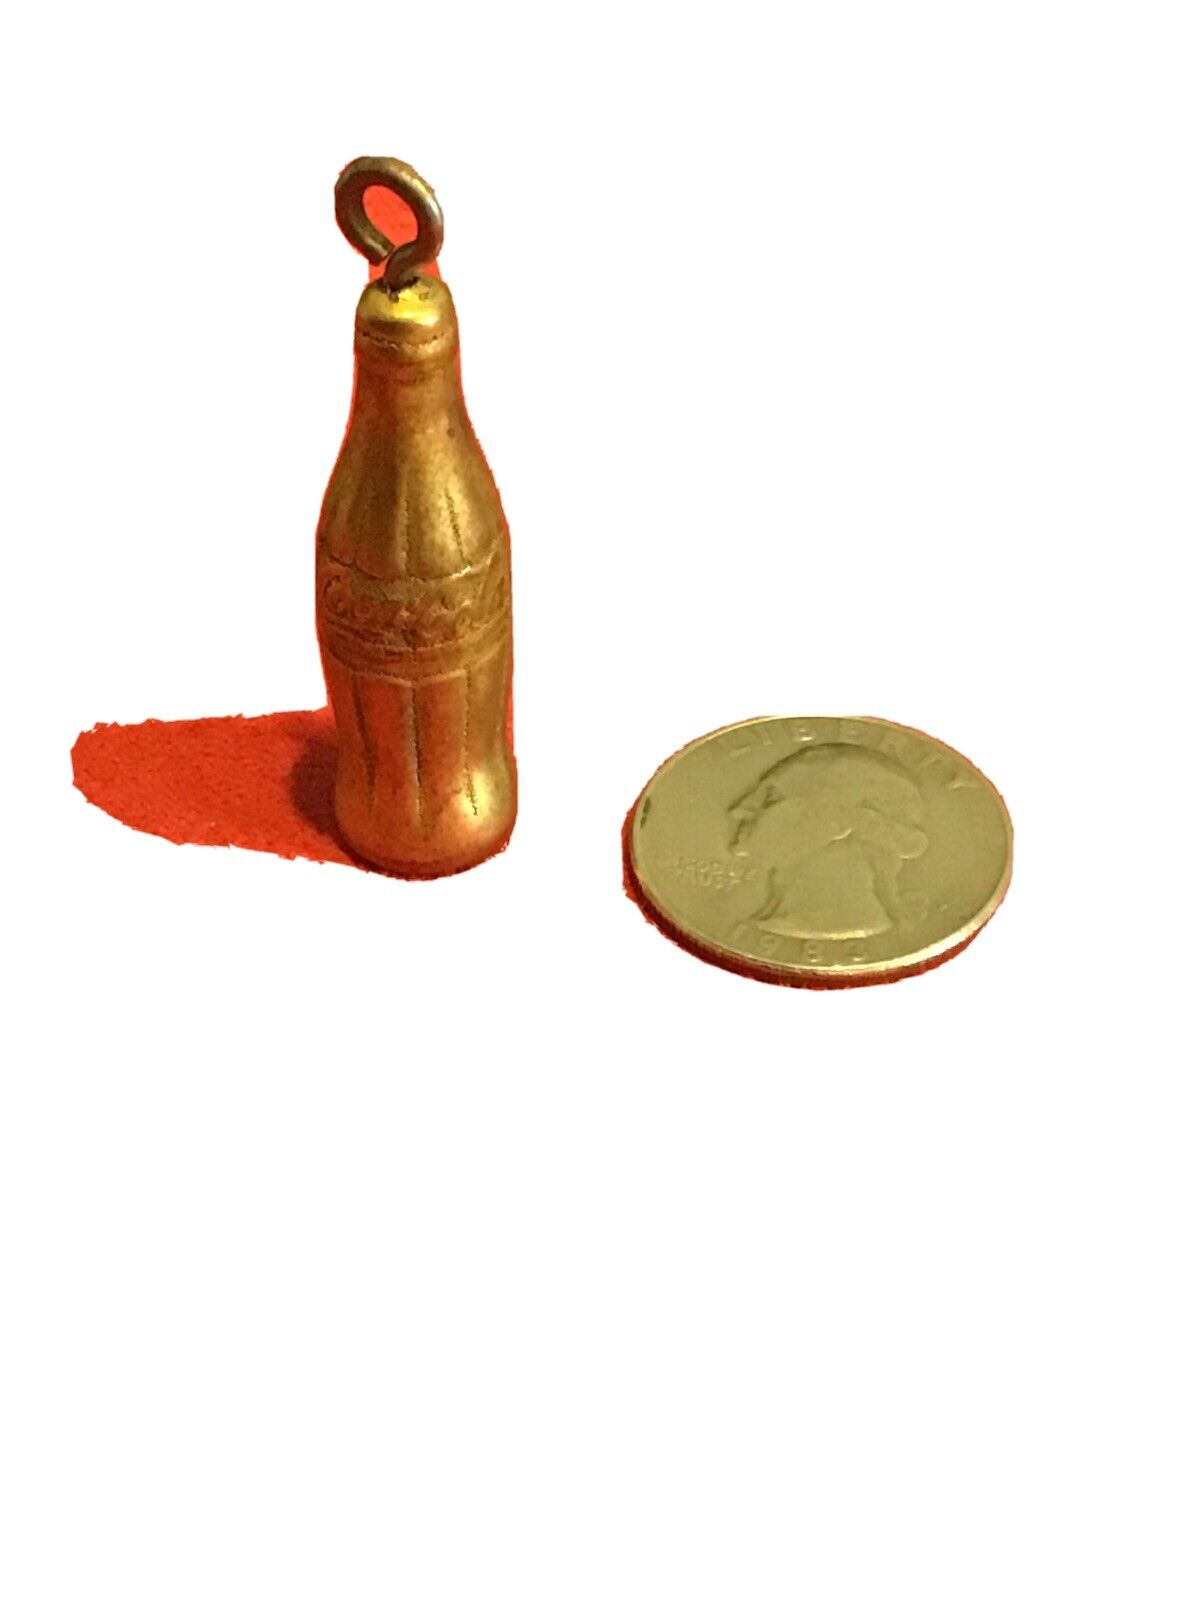 coca cola collectibles...brass Bottle From A Keychain..UNIQUE